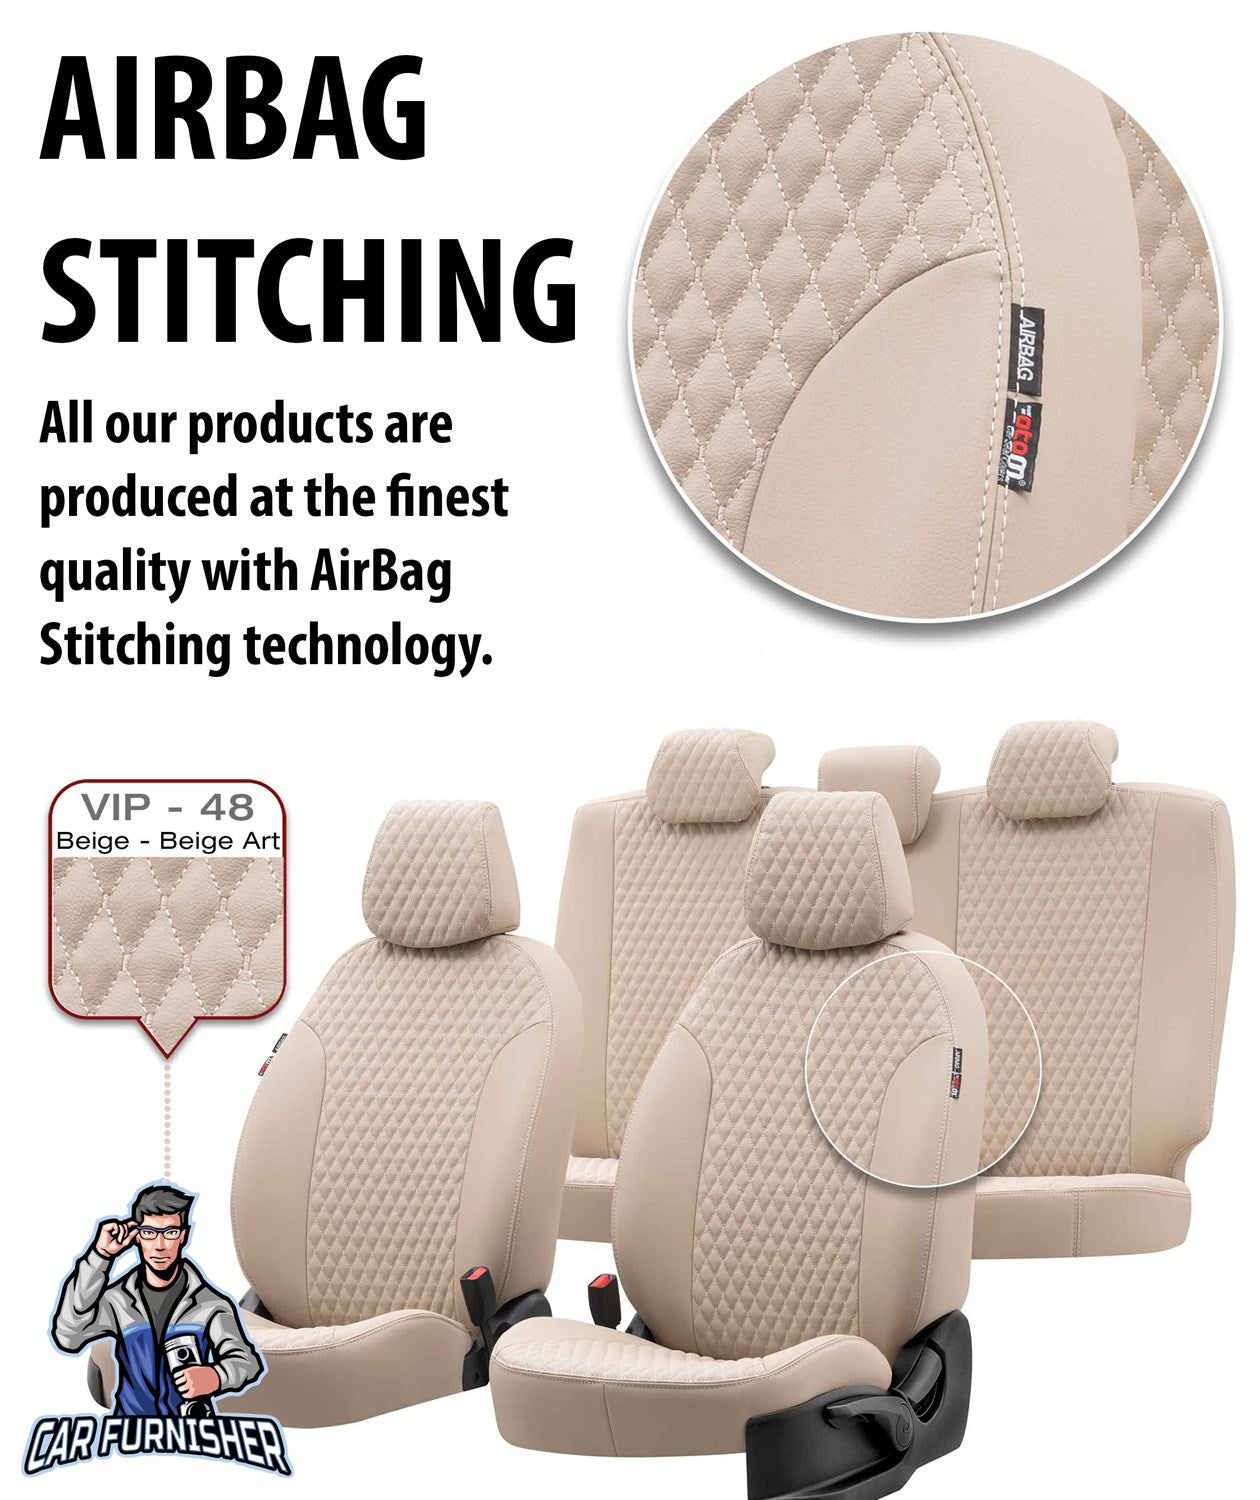 Ssangyong Tivoli Seat Covers Amsterdam Leather Design Ivory Leather